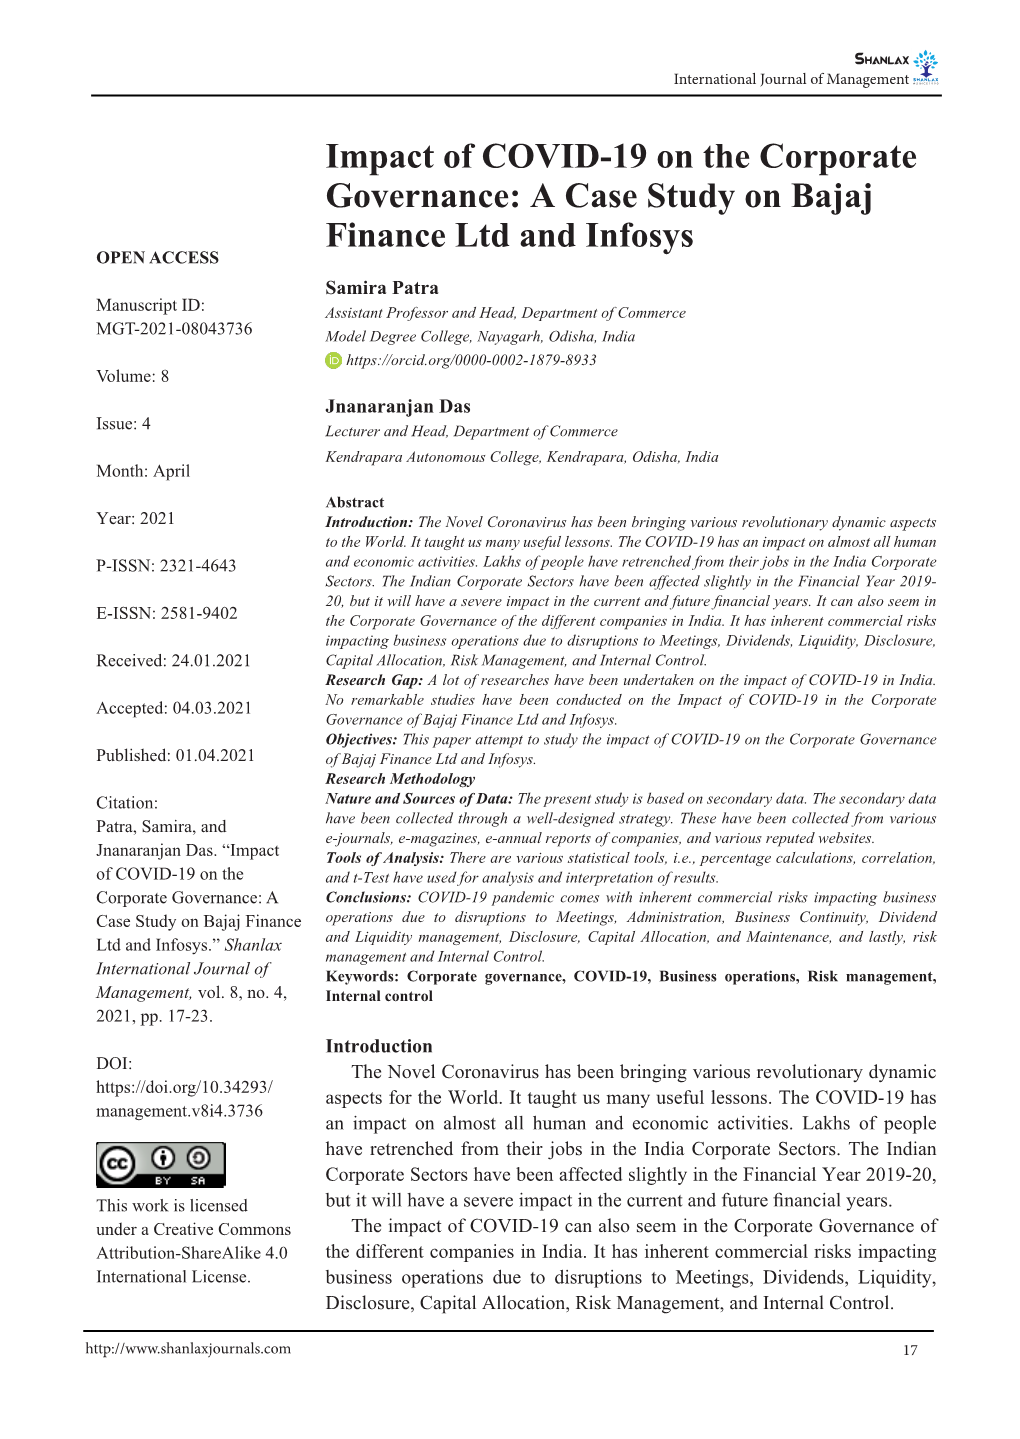 Impact of COVID-19 on the Corporate Governance: a Case Study on Bajaj